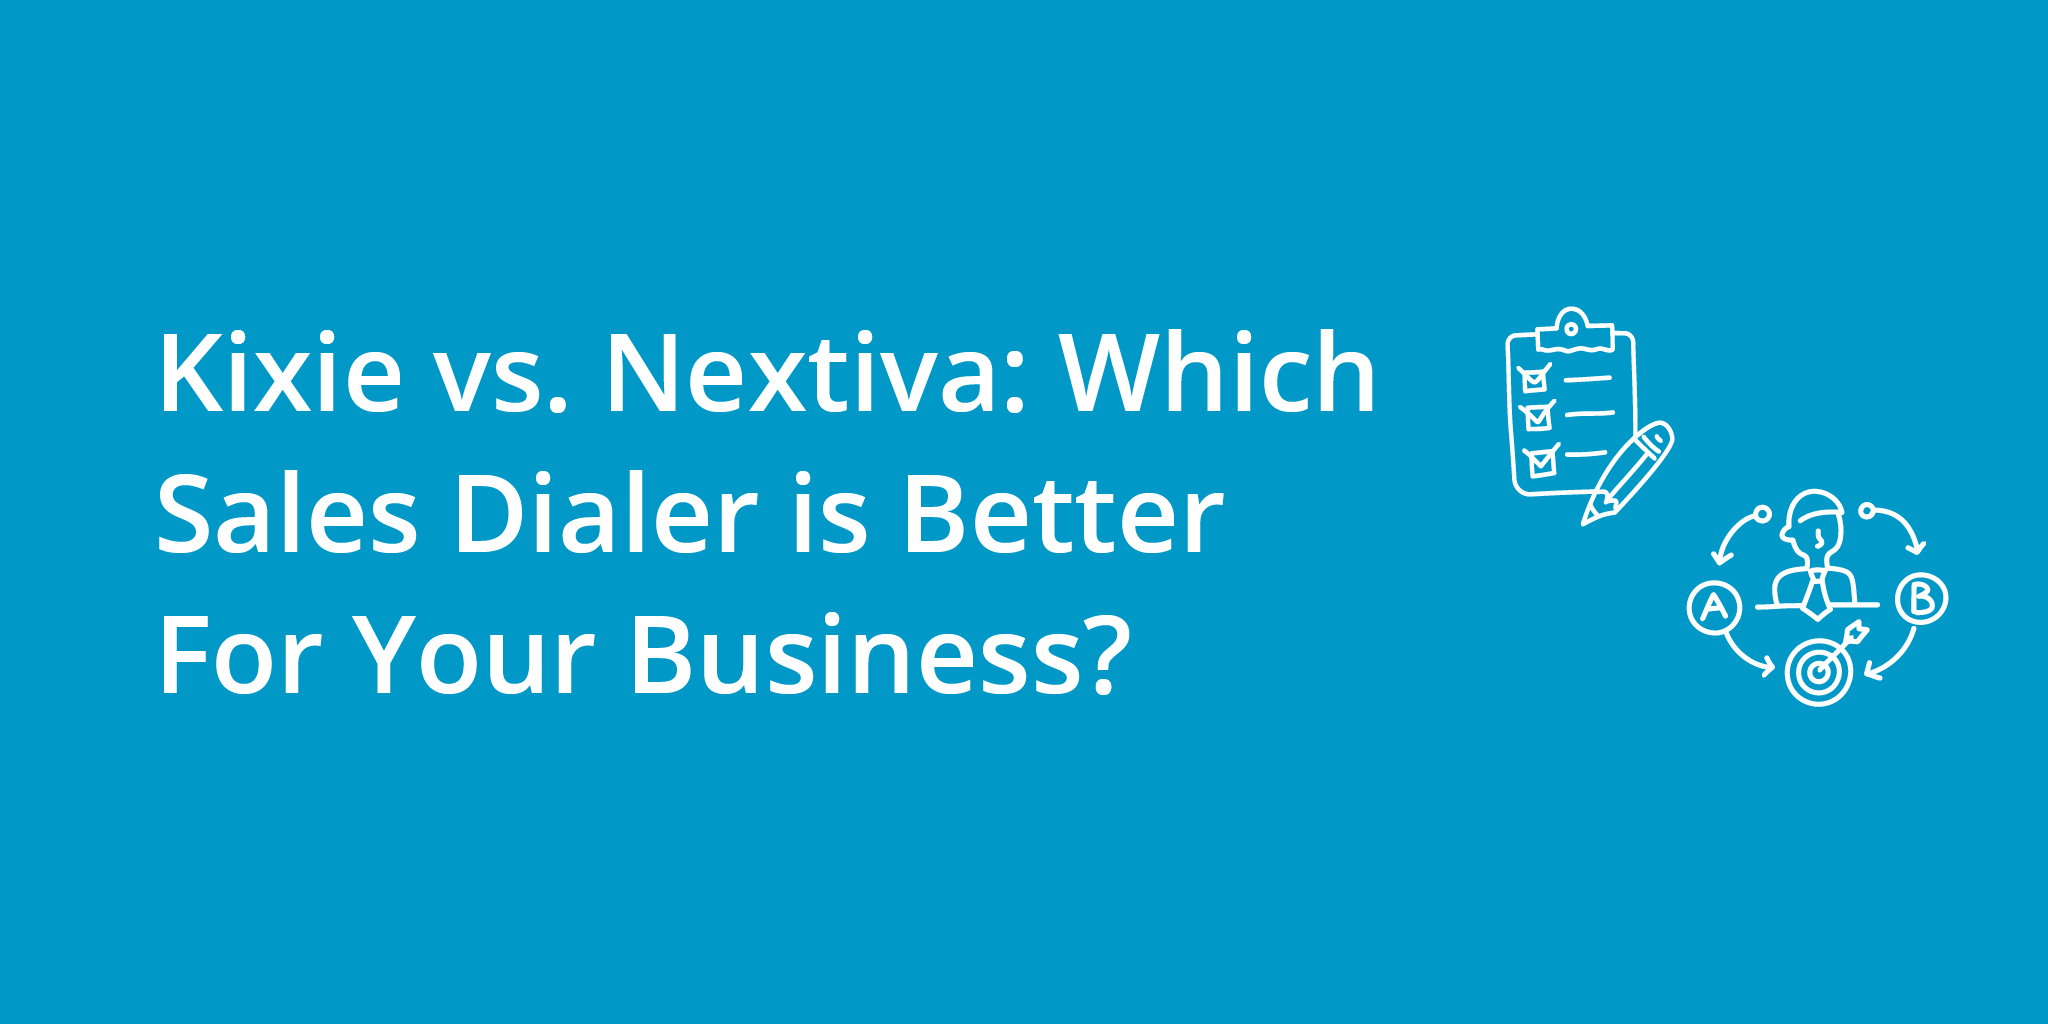 Kixie vs. Nextiva: Which Sales Dialer is Better For Your Business?